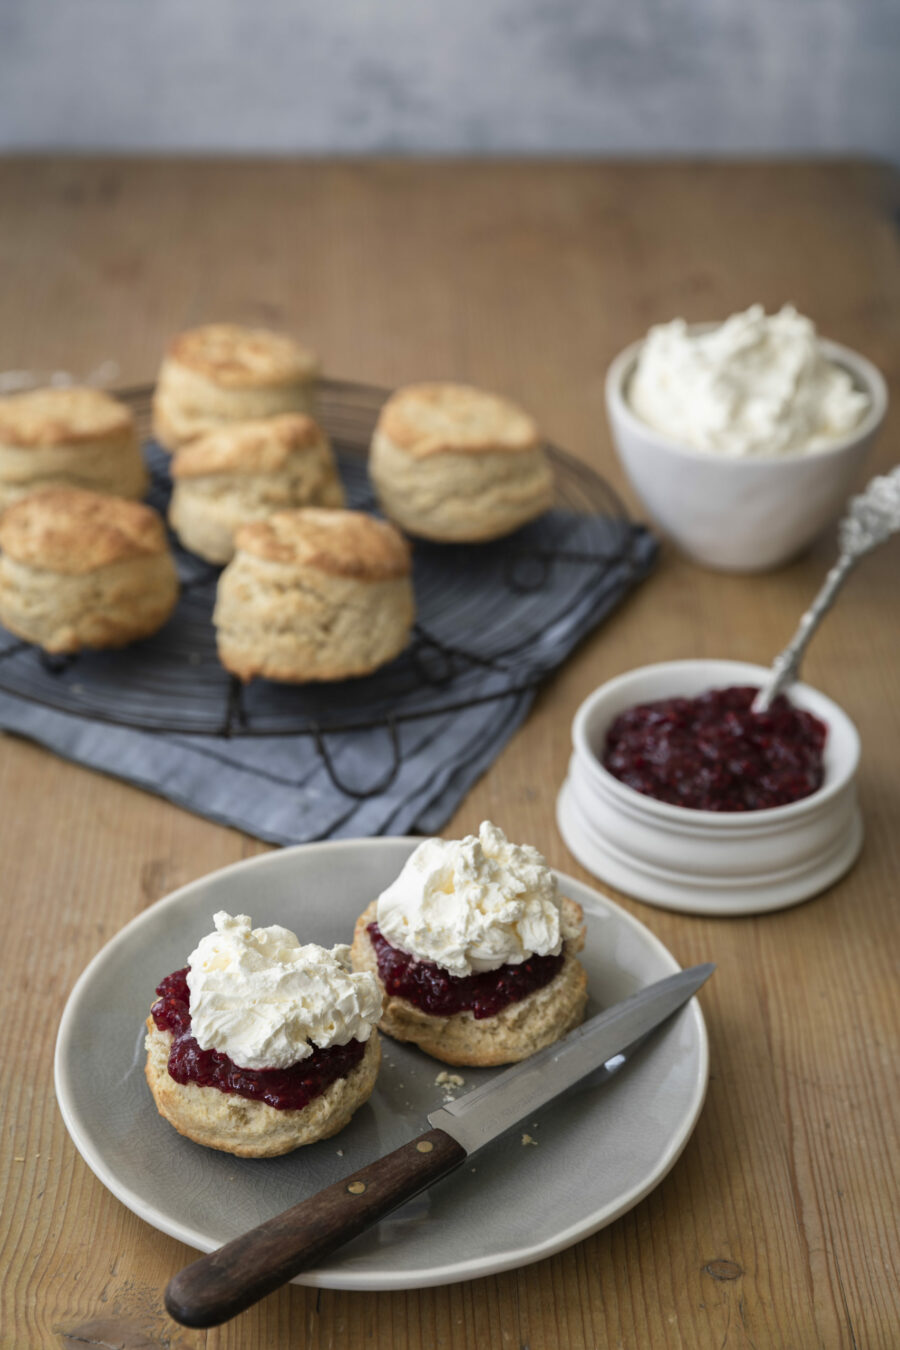 Add magic to your afternoon tea with this classic scone recipe